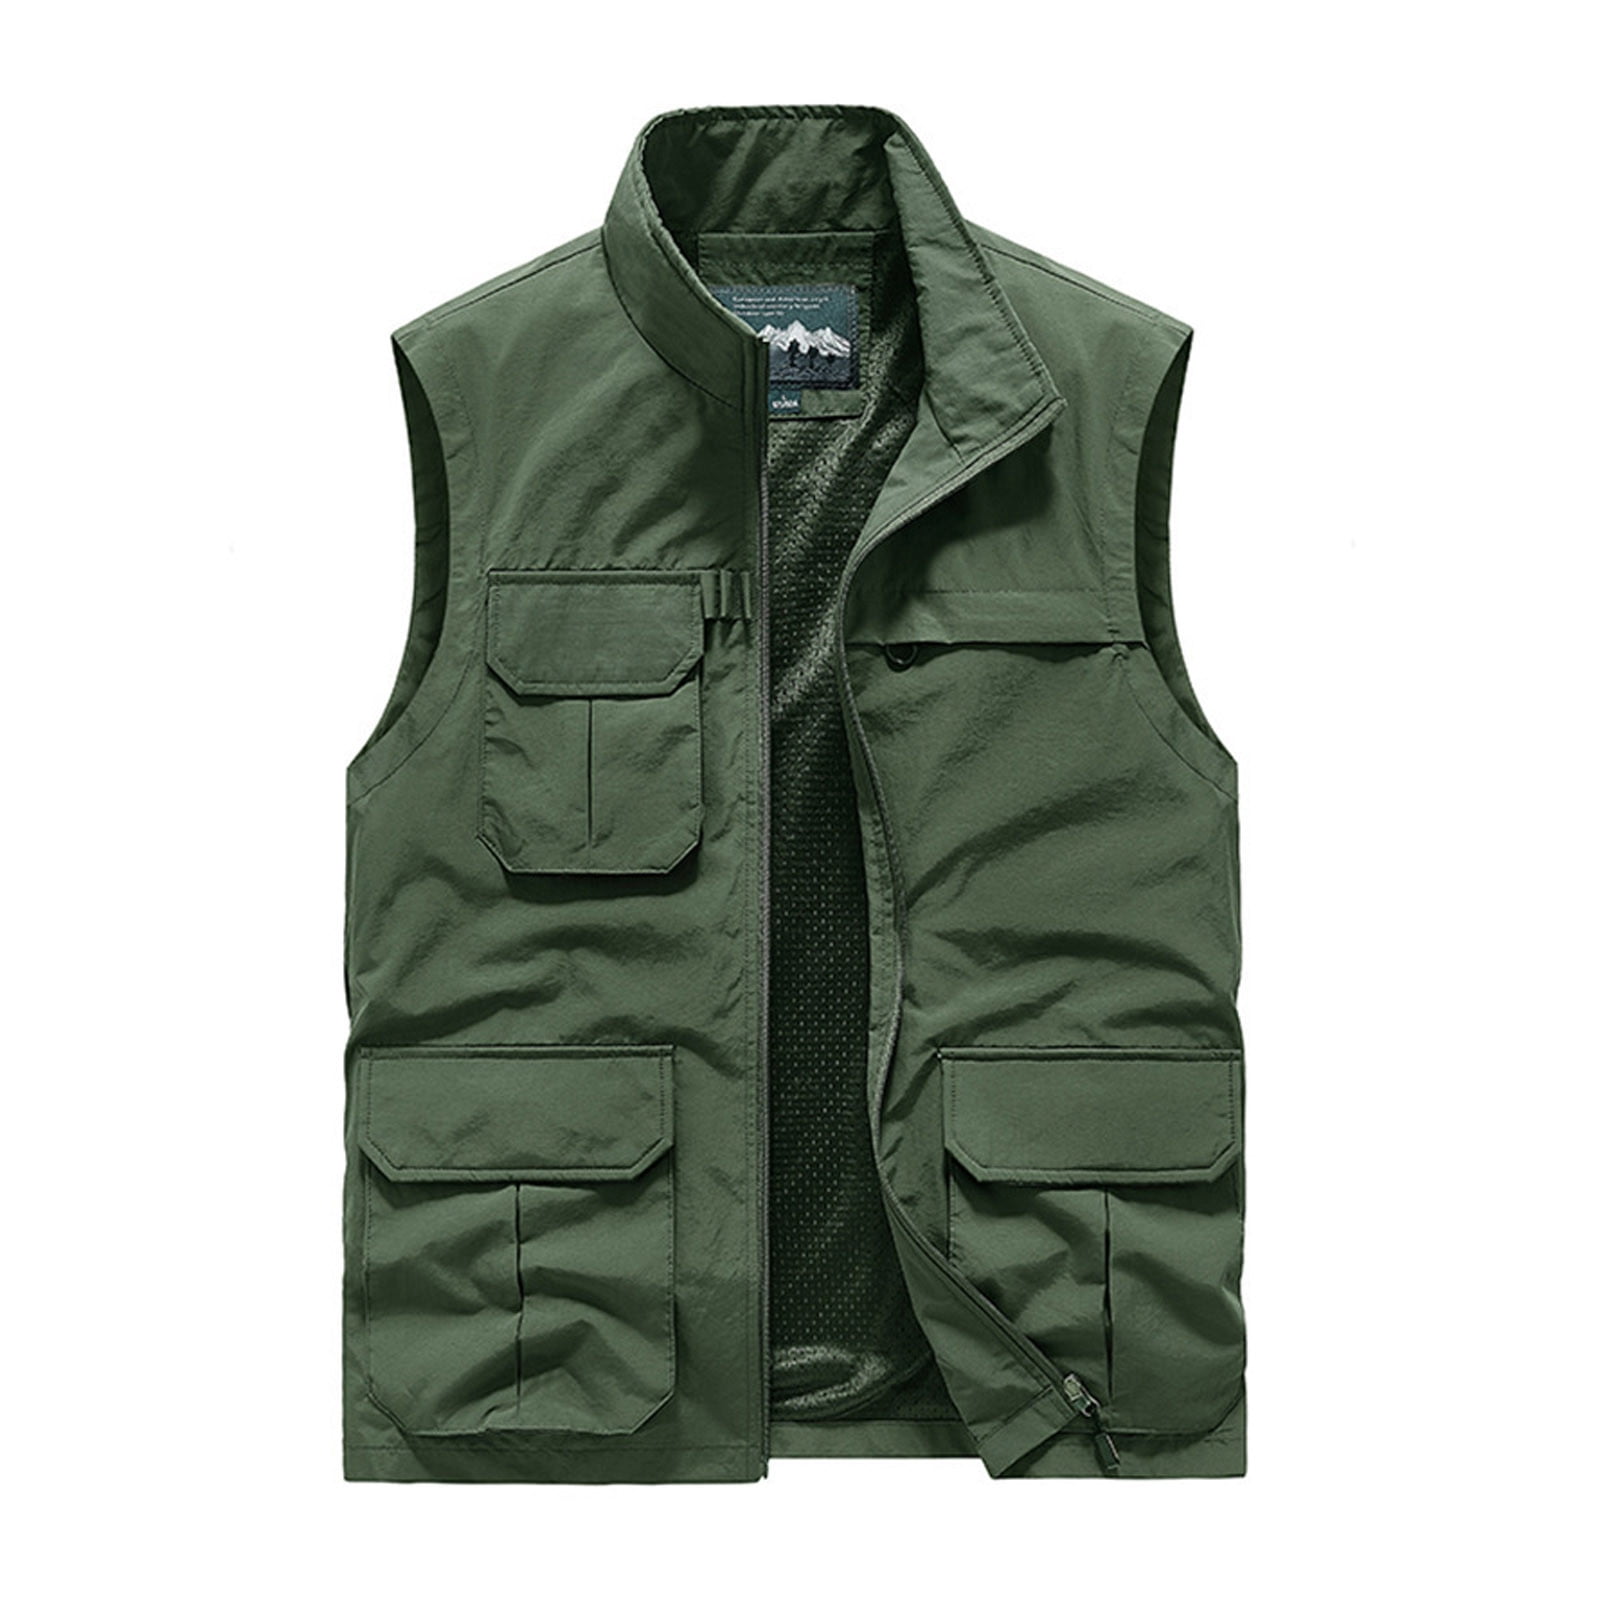 Yydgh Men's Outdoor Fishing Vest Casual Work Cargo Vests Lightweight Waistcoat Vest with Pockets Fall Photography Tour Coats, Size: 4XL, Green